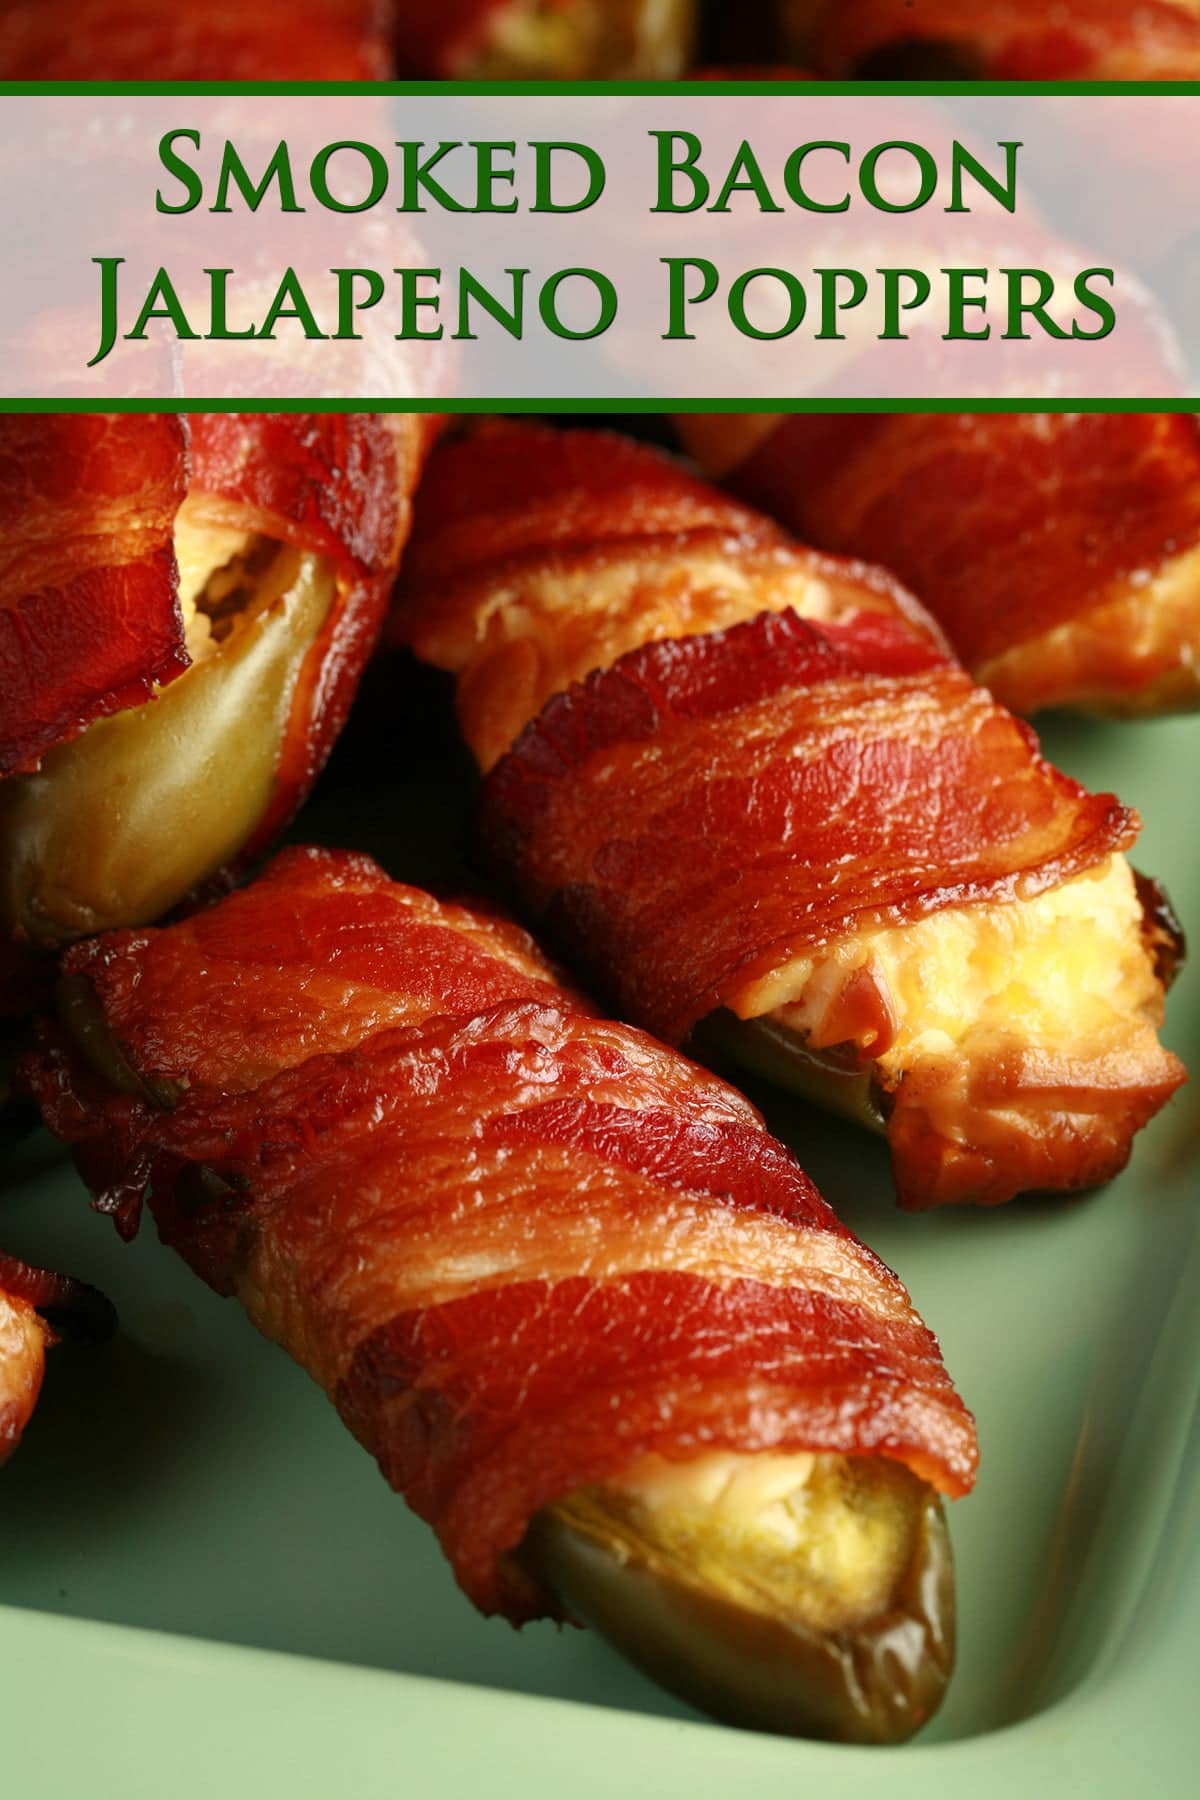 A close up view of smoked jalapeno poppers.